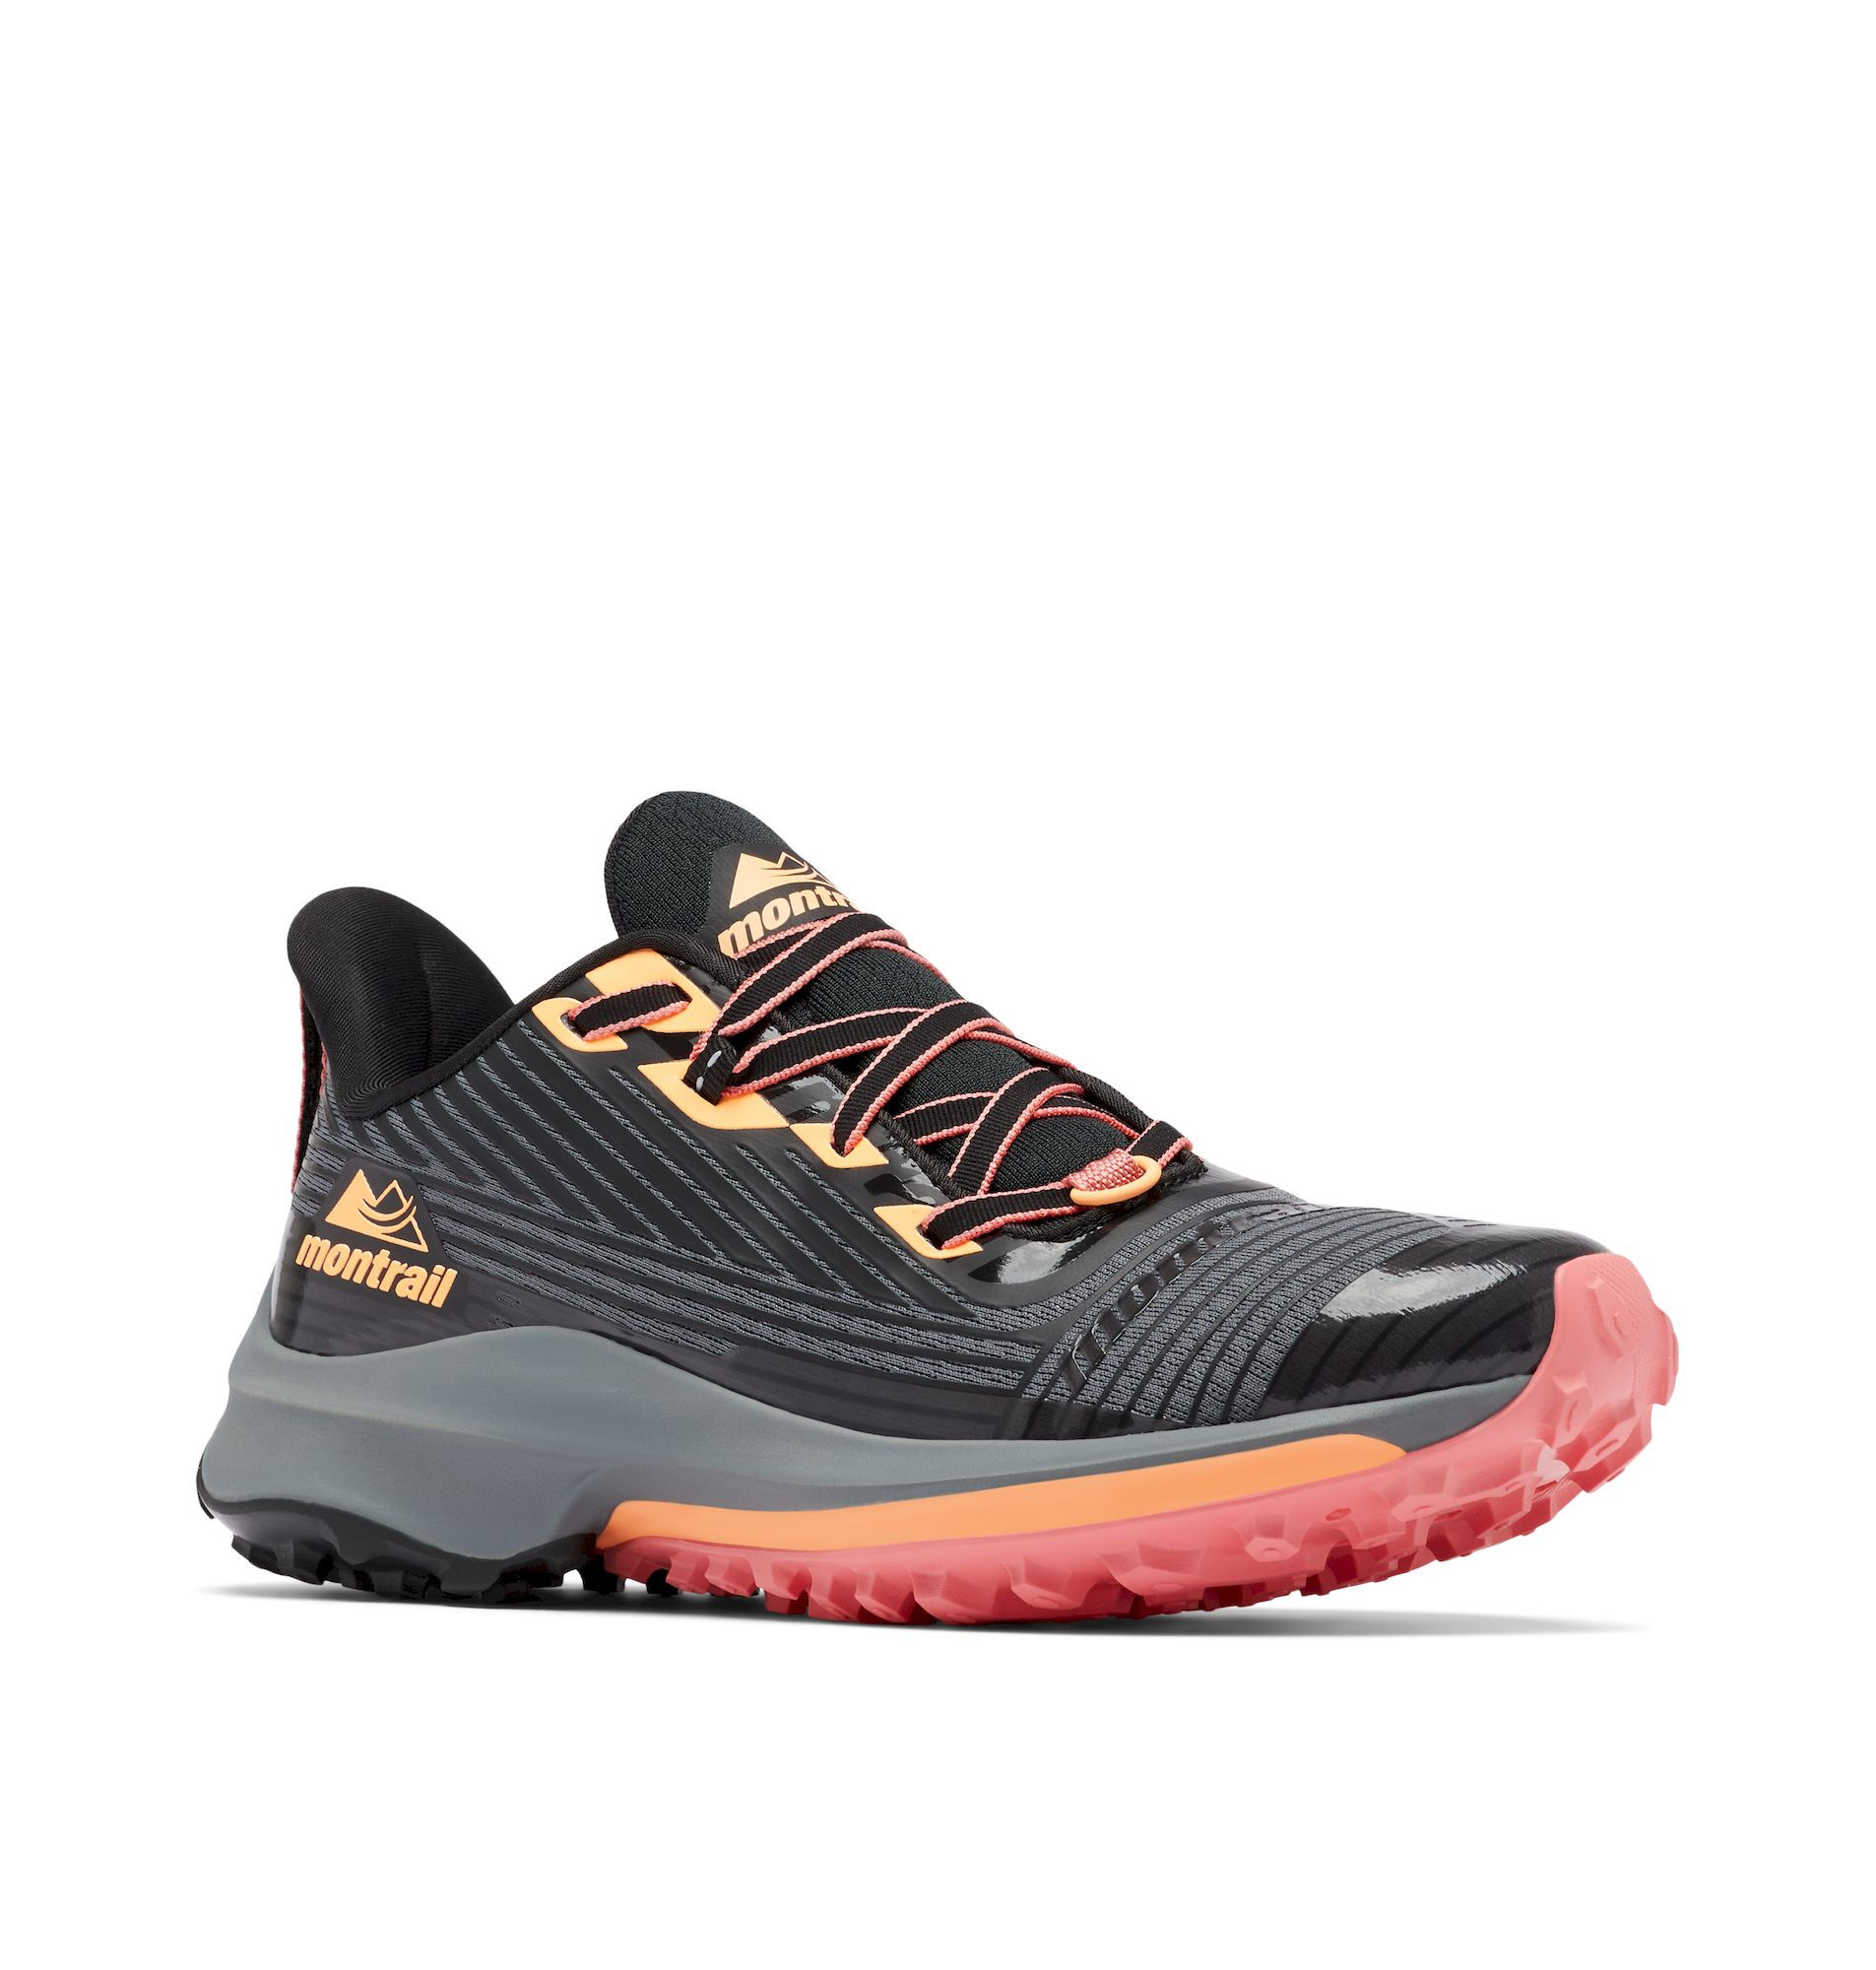 Columbia Montrail Trinity Ag - Zapatillas trail running - Mujer